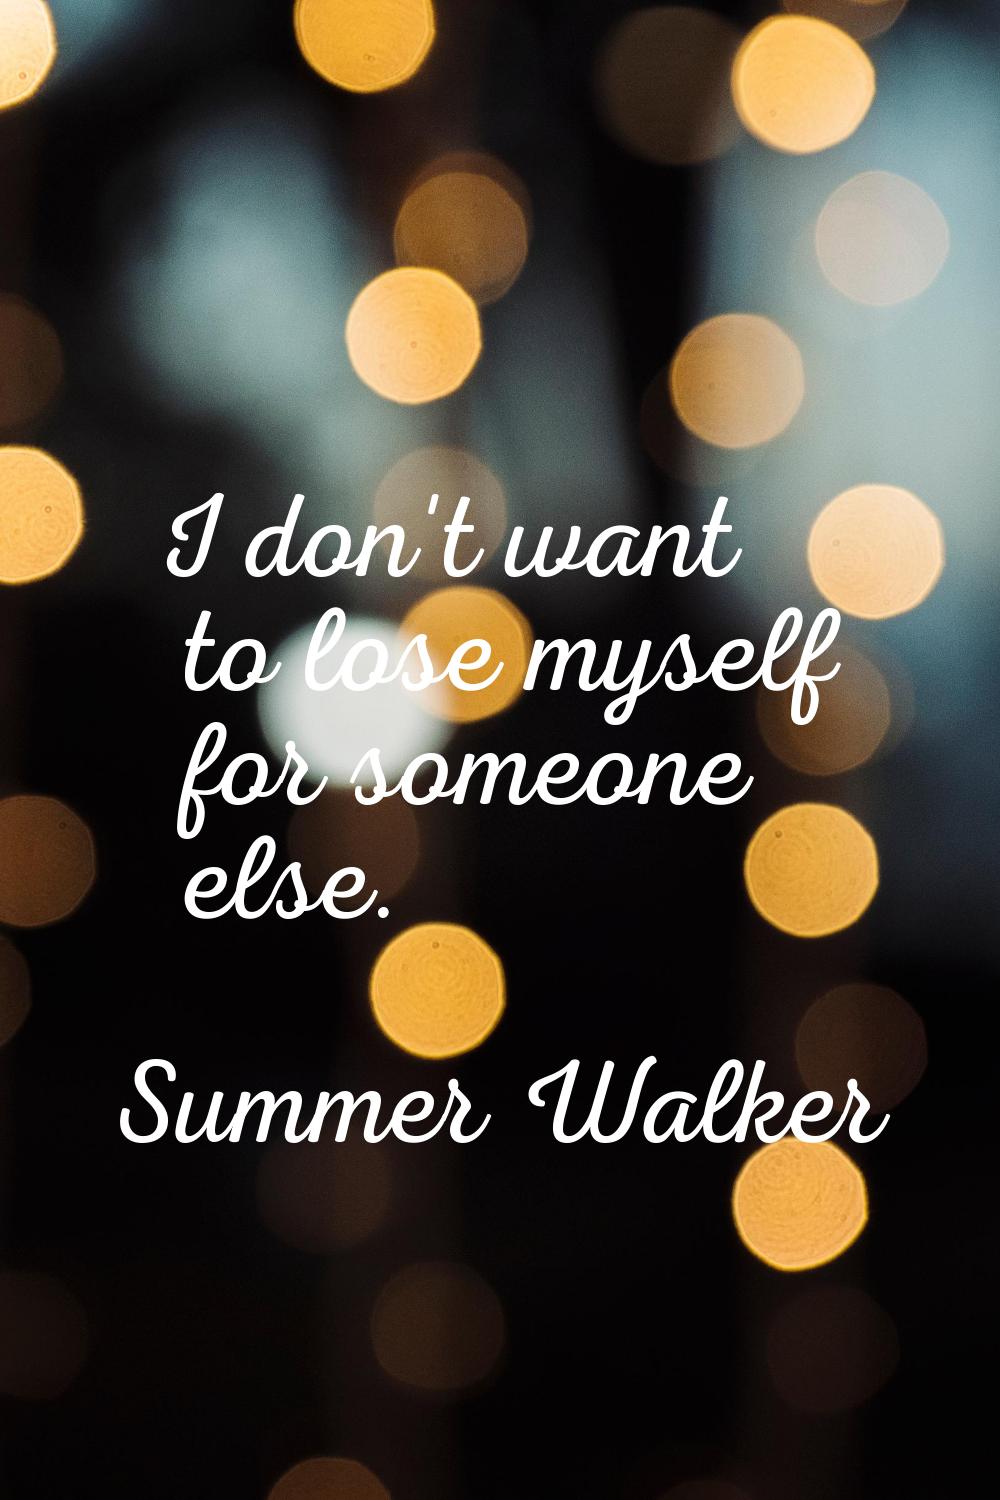 I don't want to lose myself for someone else.